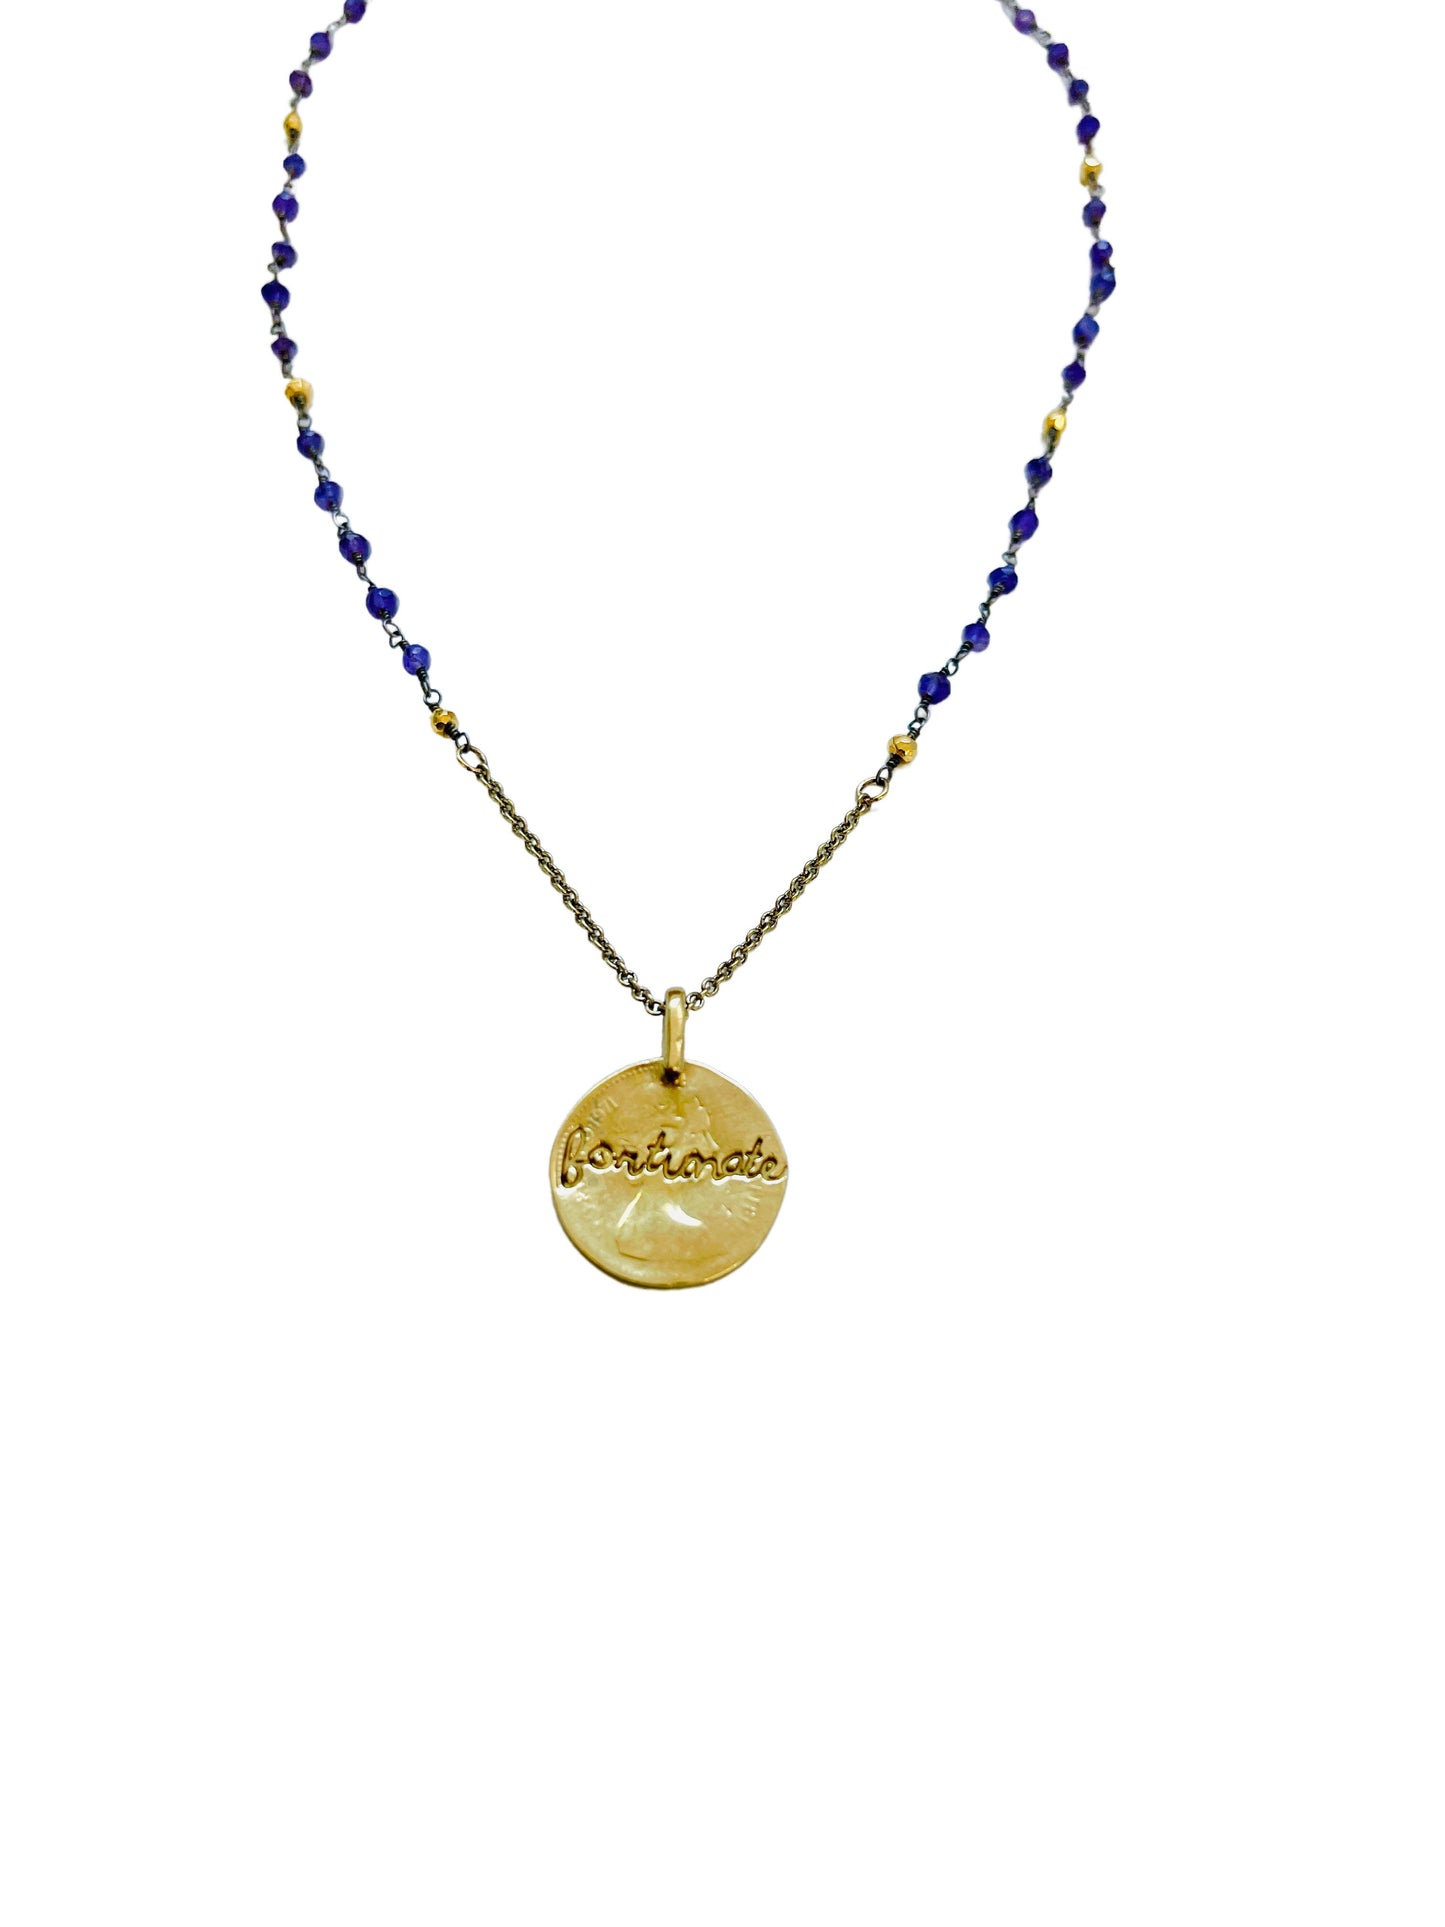 Amethyst Necklace with Fortunate Stamped Brass Coin